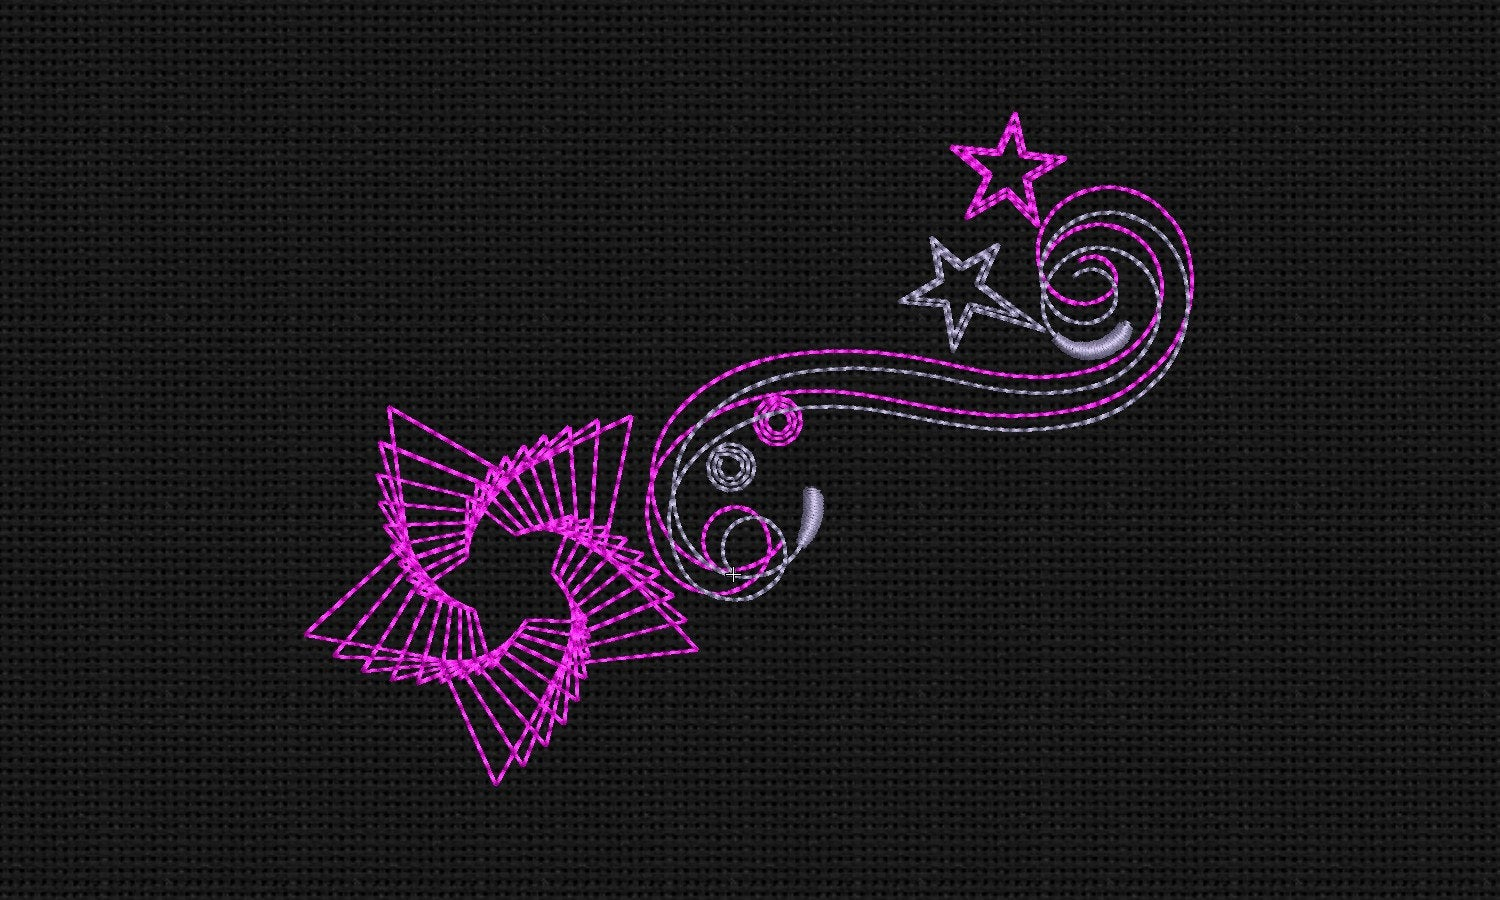 Machine Embroidery Patterns Star Machine Embroidery Designs 5x7 Instant Download Small Star Embroidery Designs Embroidery Patterns Shooting Star Silhouette Designs